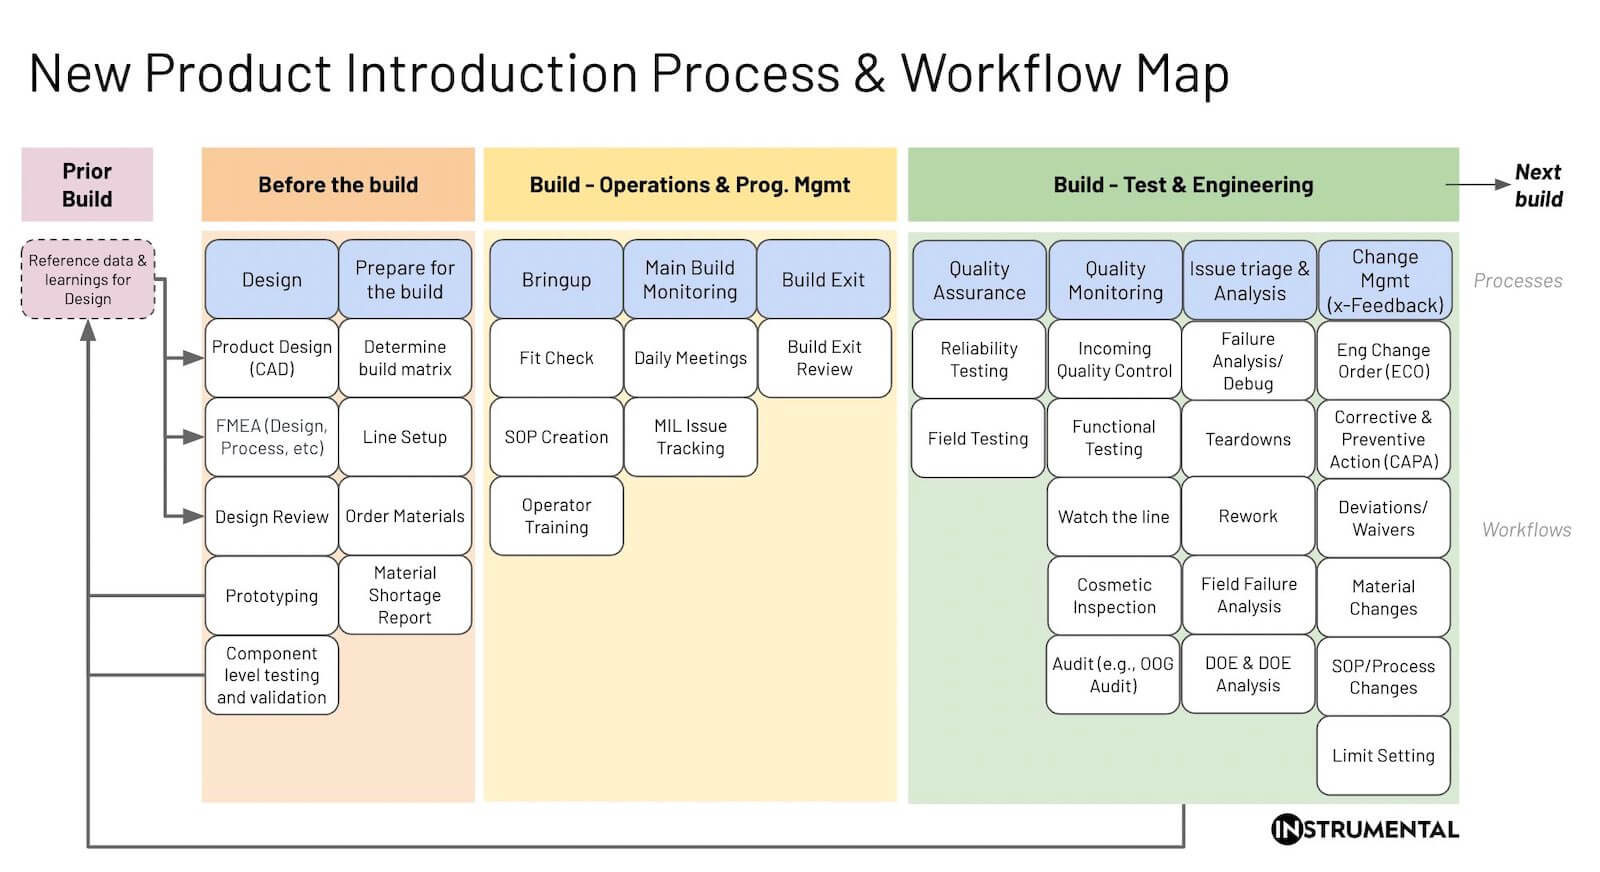 NPI Processes and Workflow Map created by Instrumental